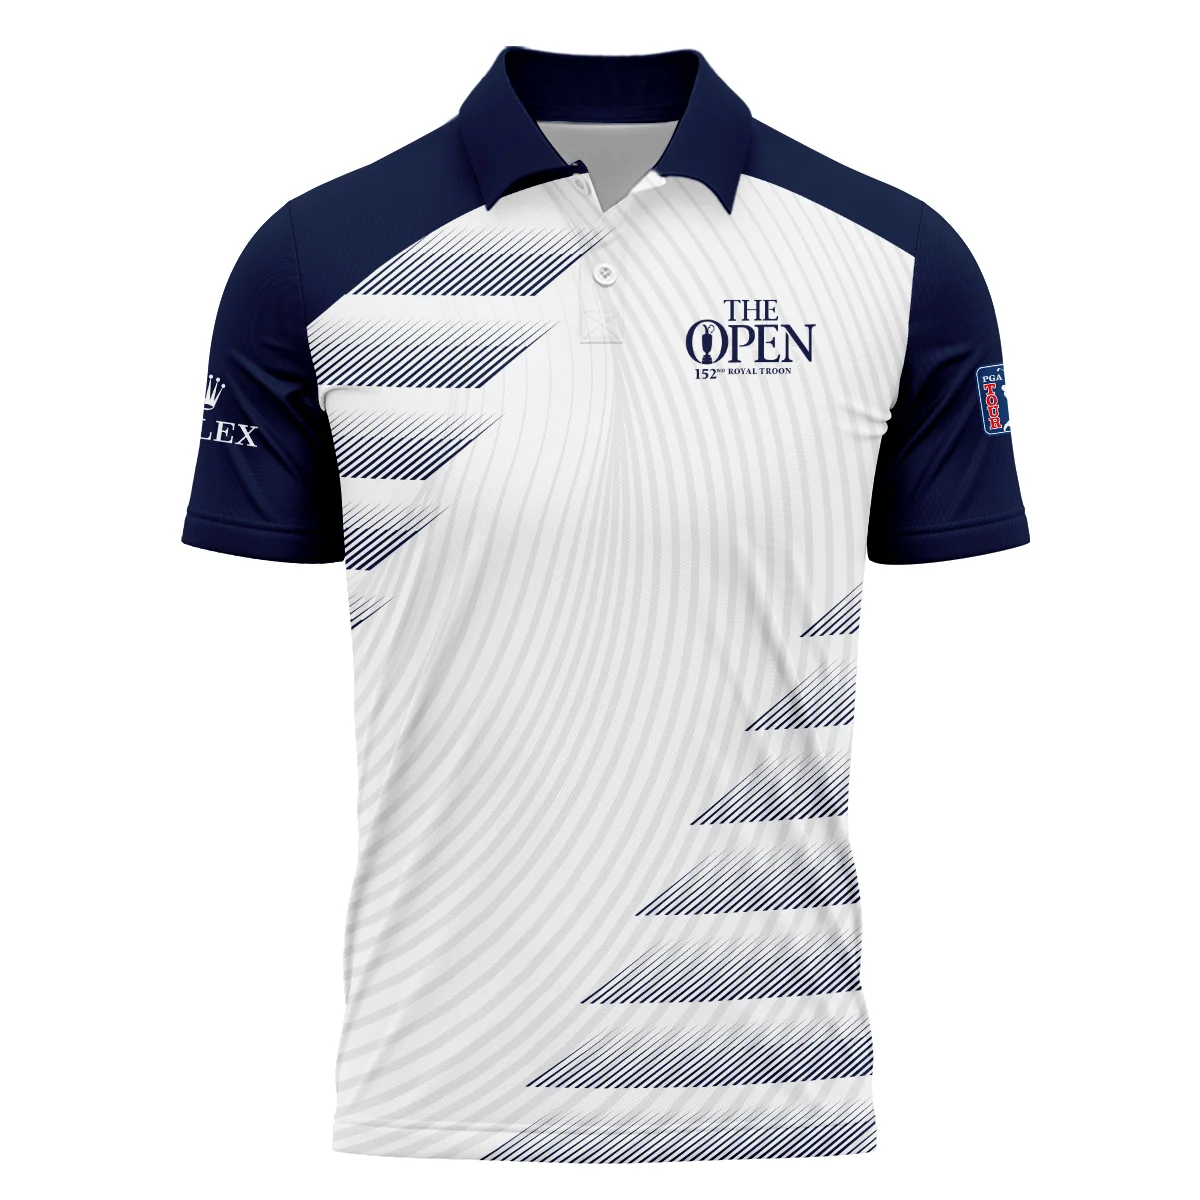 Rolex 152nd Open Championship Blue White Line Pattern Polo Shirt All Over Prints HOTOP280624A02ROXPL